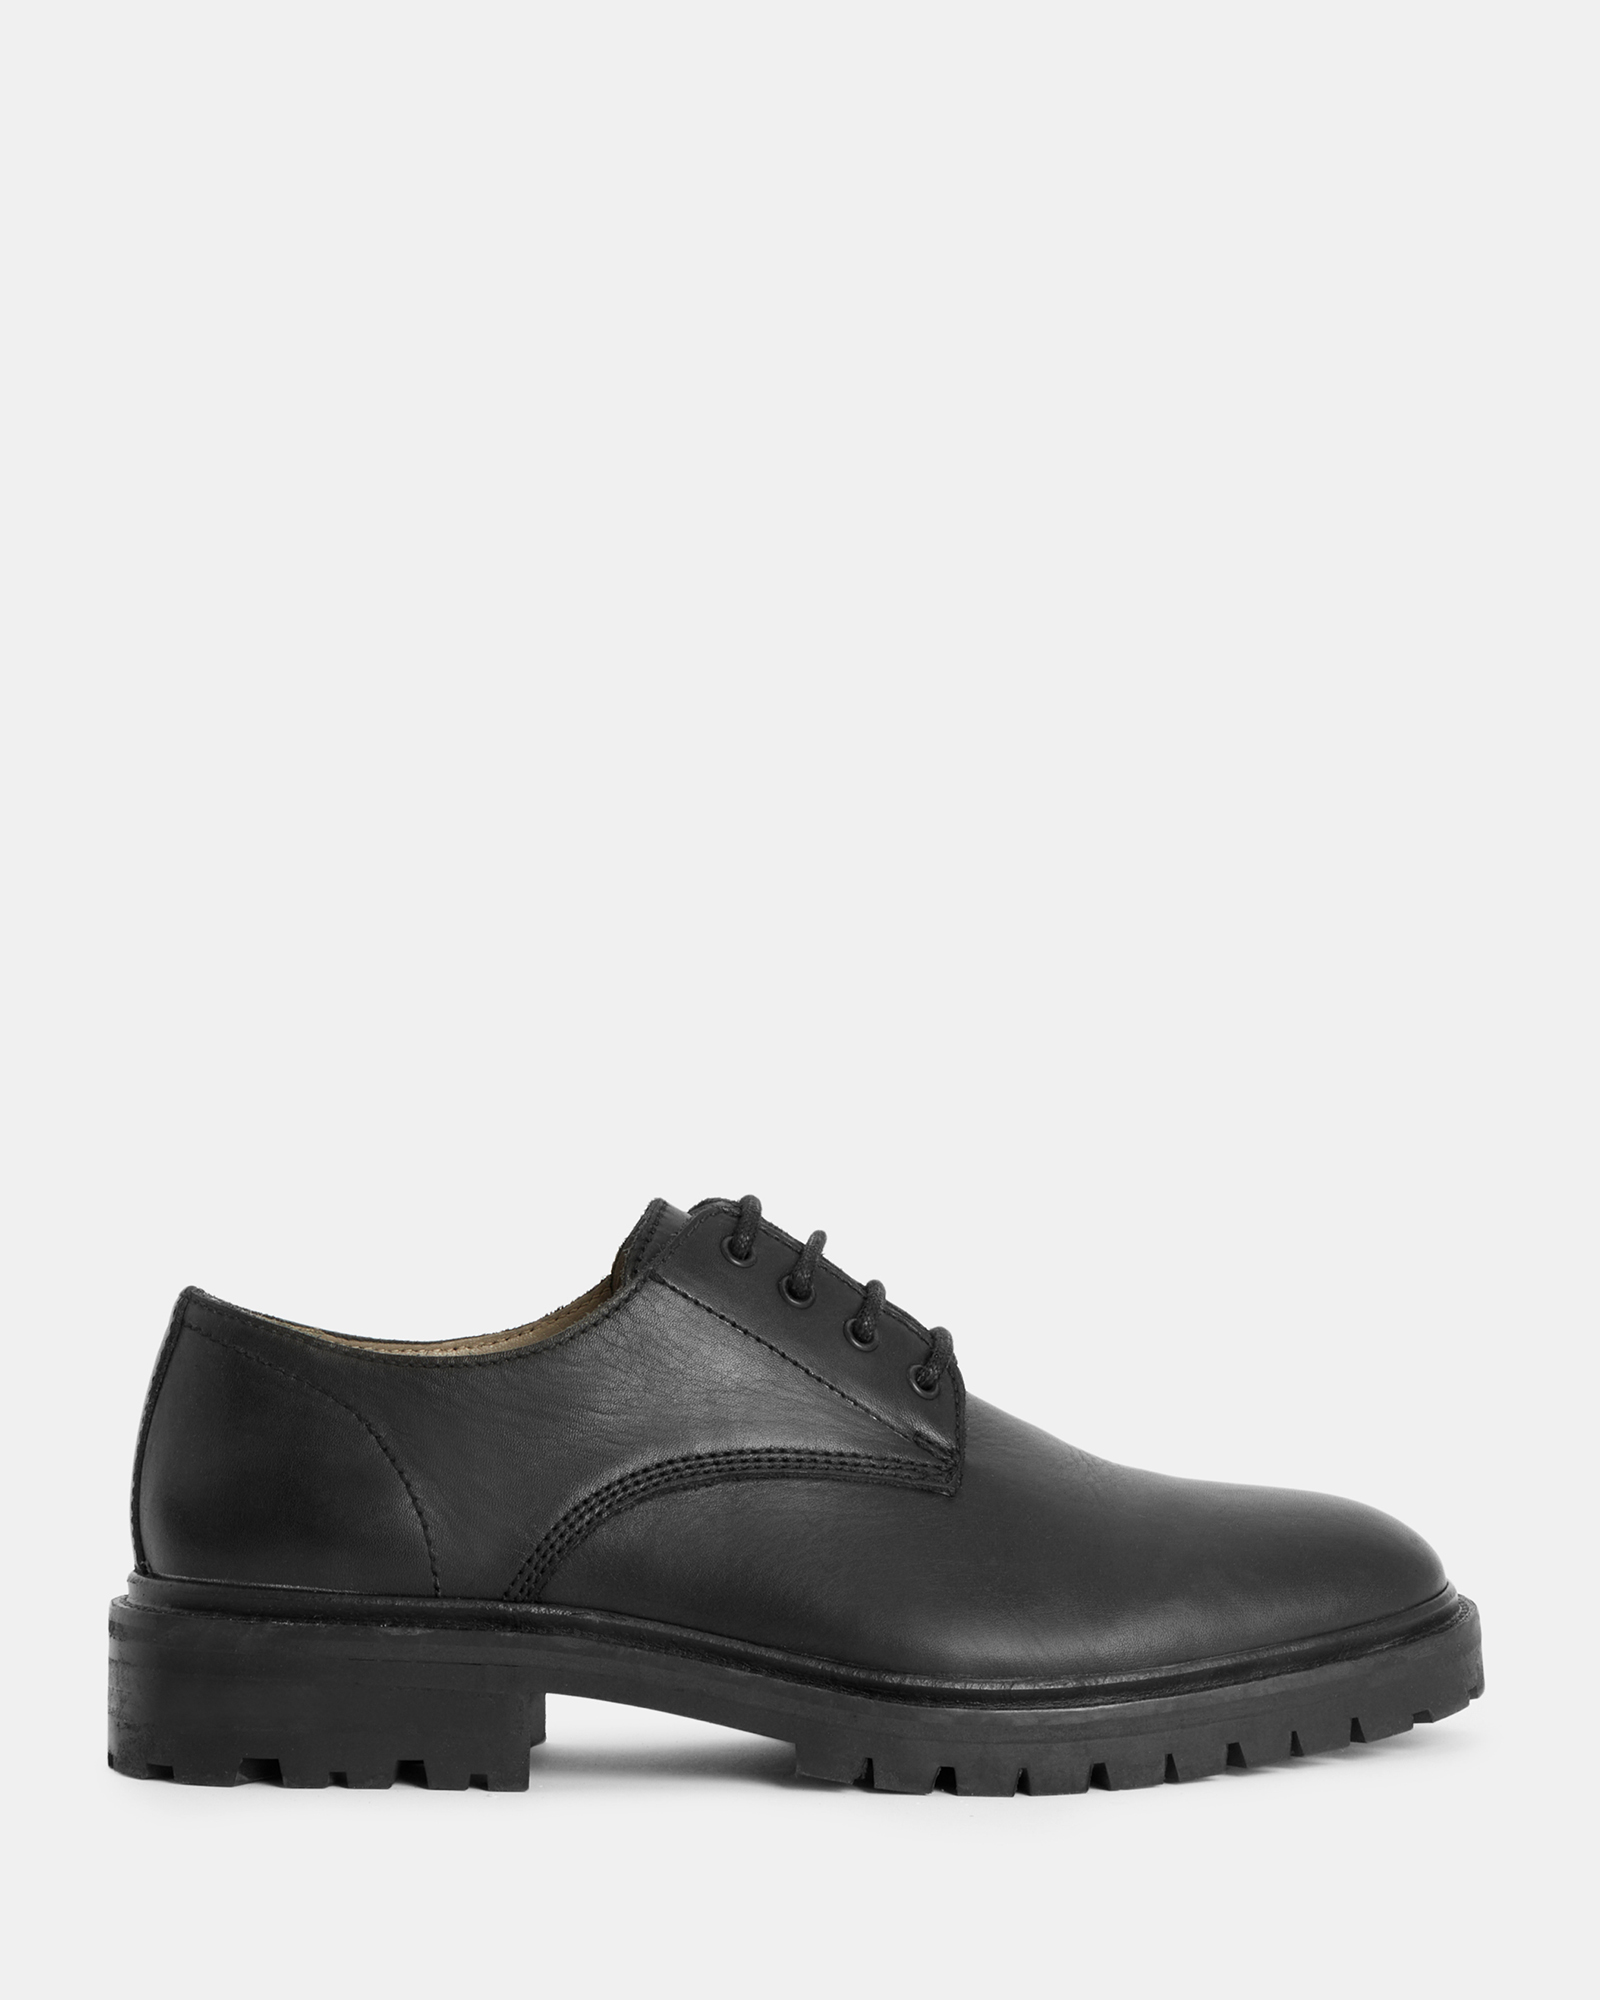 AllSaints Jarred Cleated Sole Formal Leather Shoes